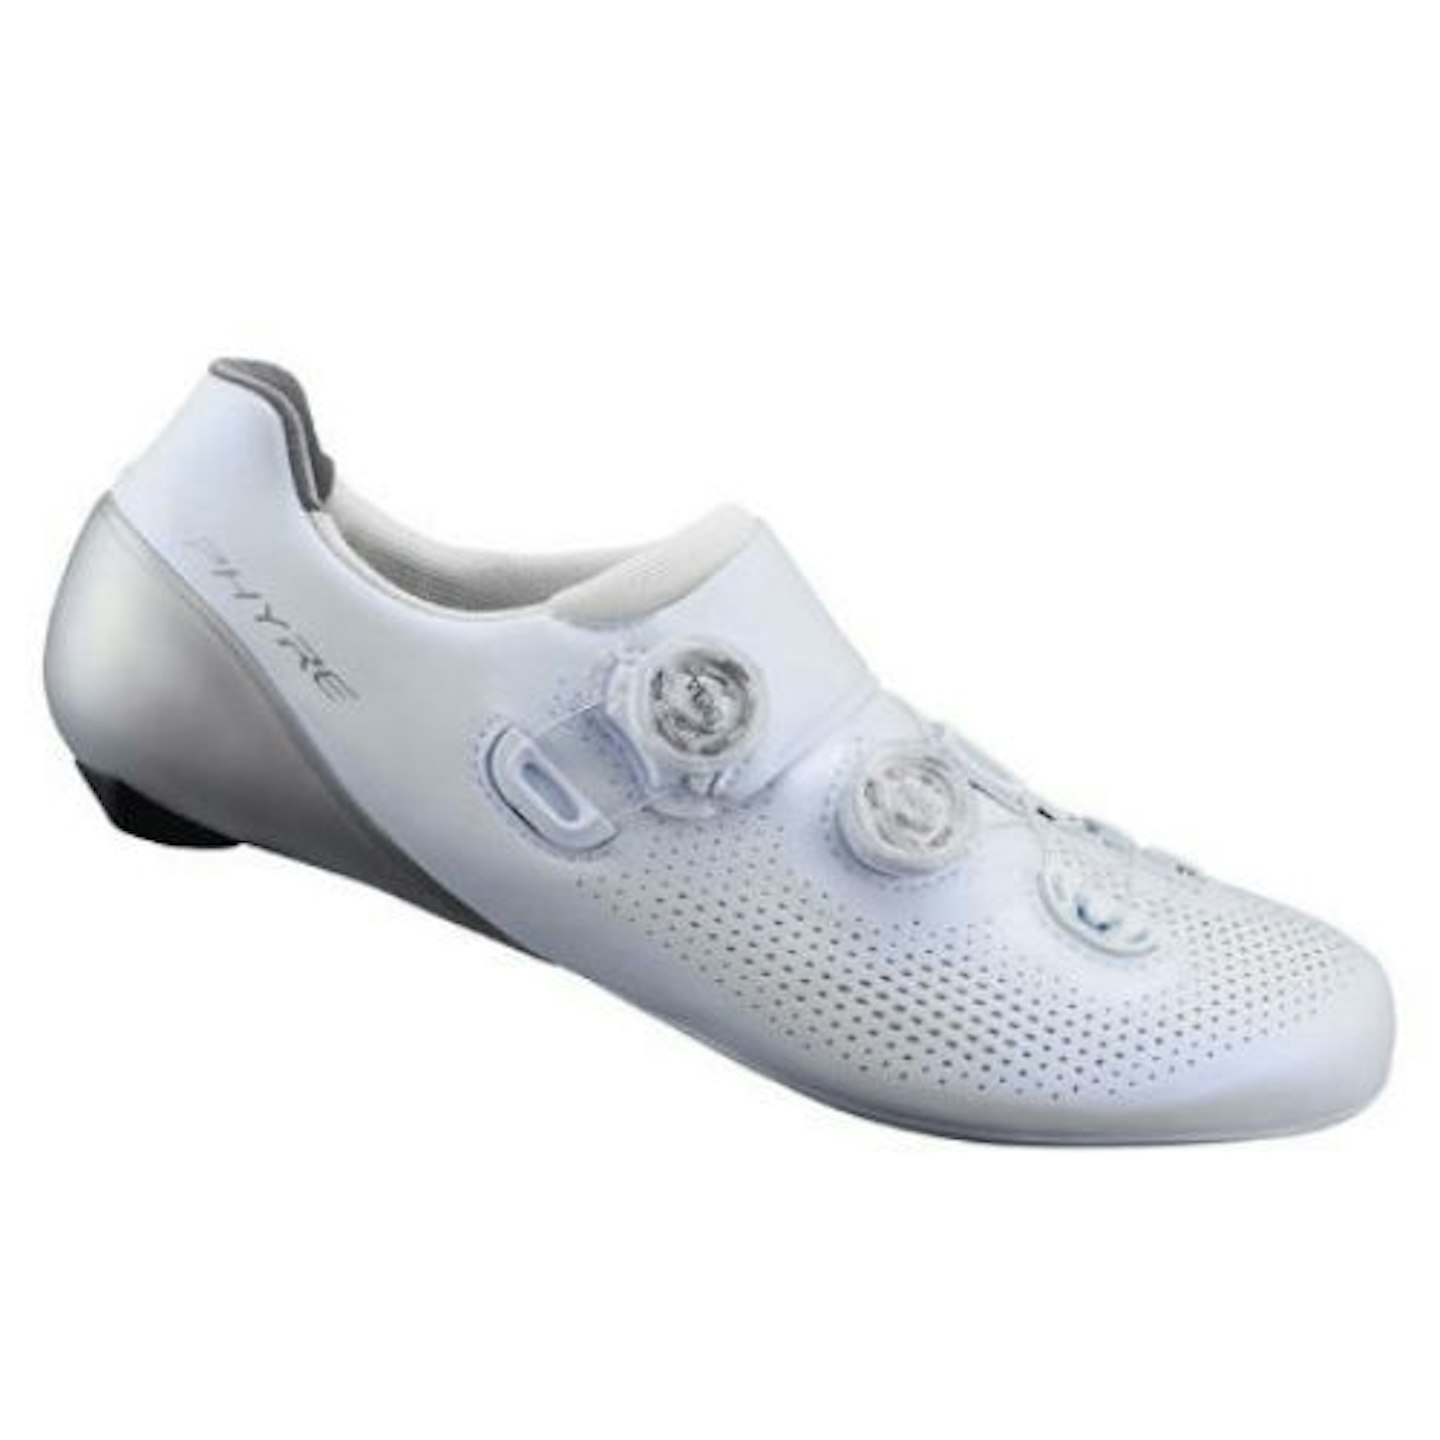 Shimano RC9 SPD-SL S-Phyre Road Shoes in White